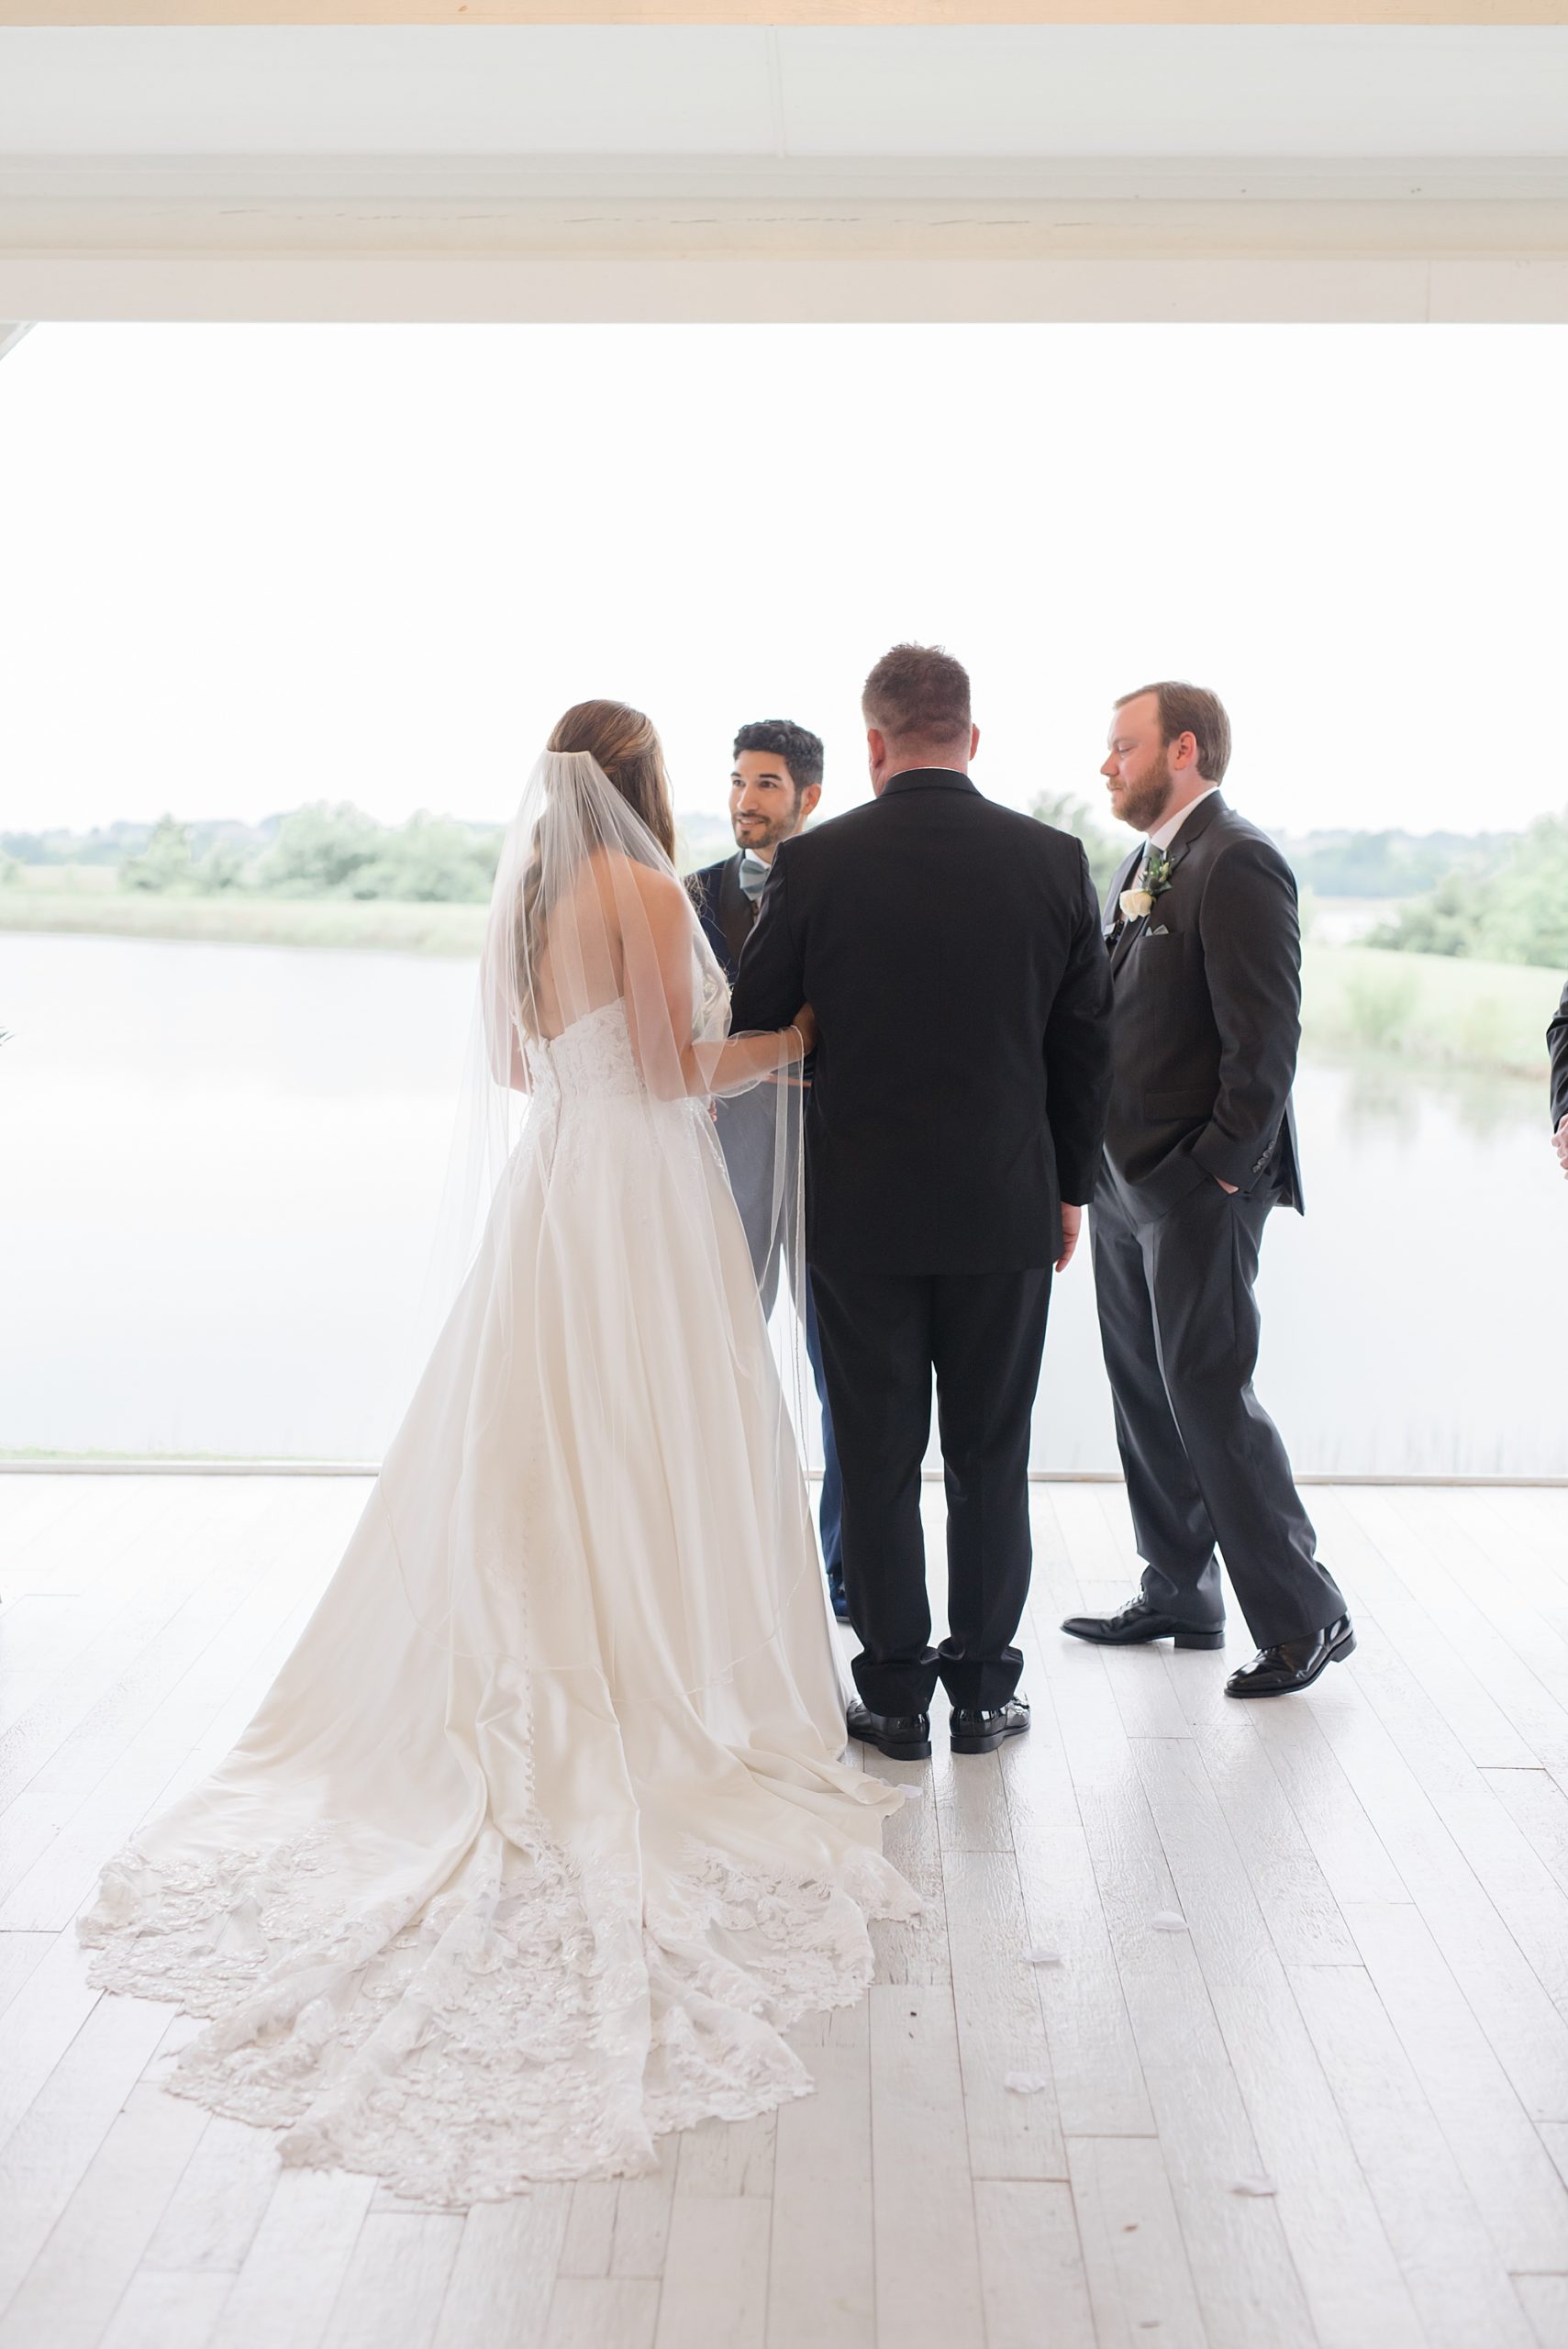 newlyweds exchange vows during Texas wedding ceremony